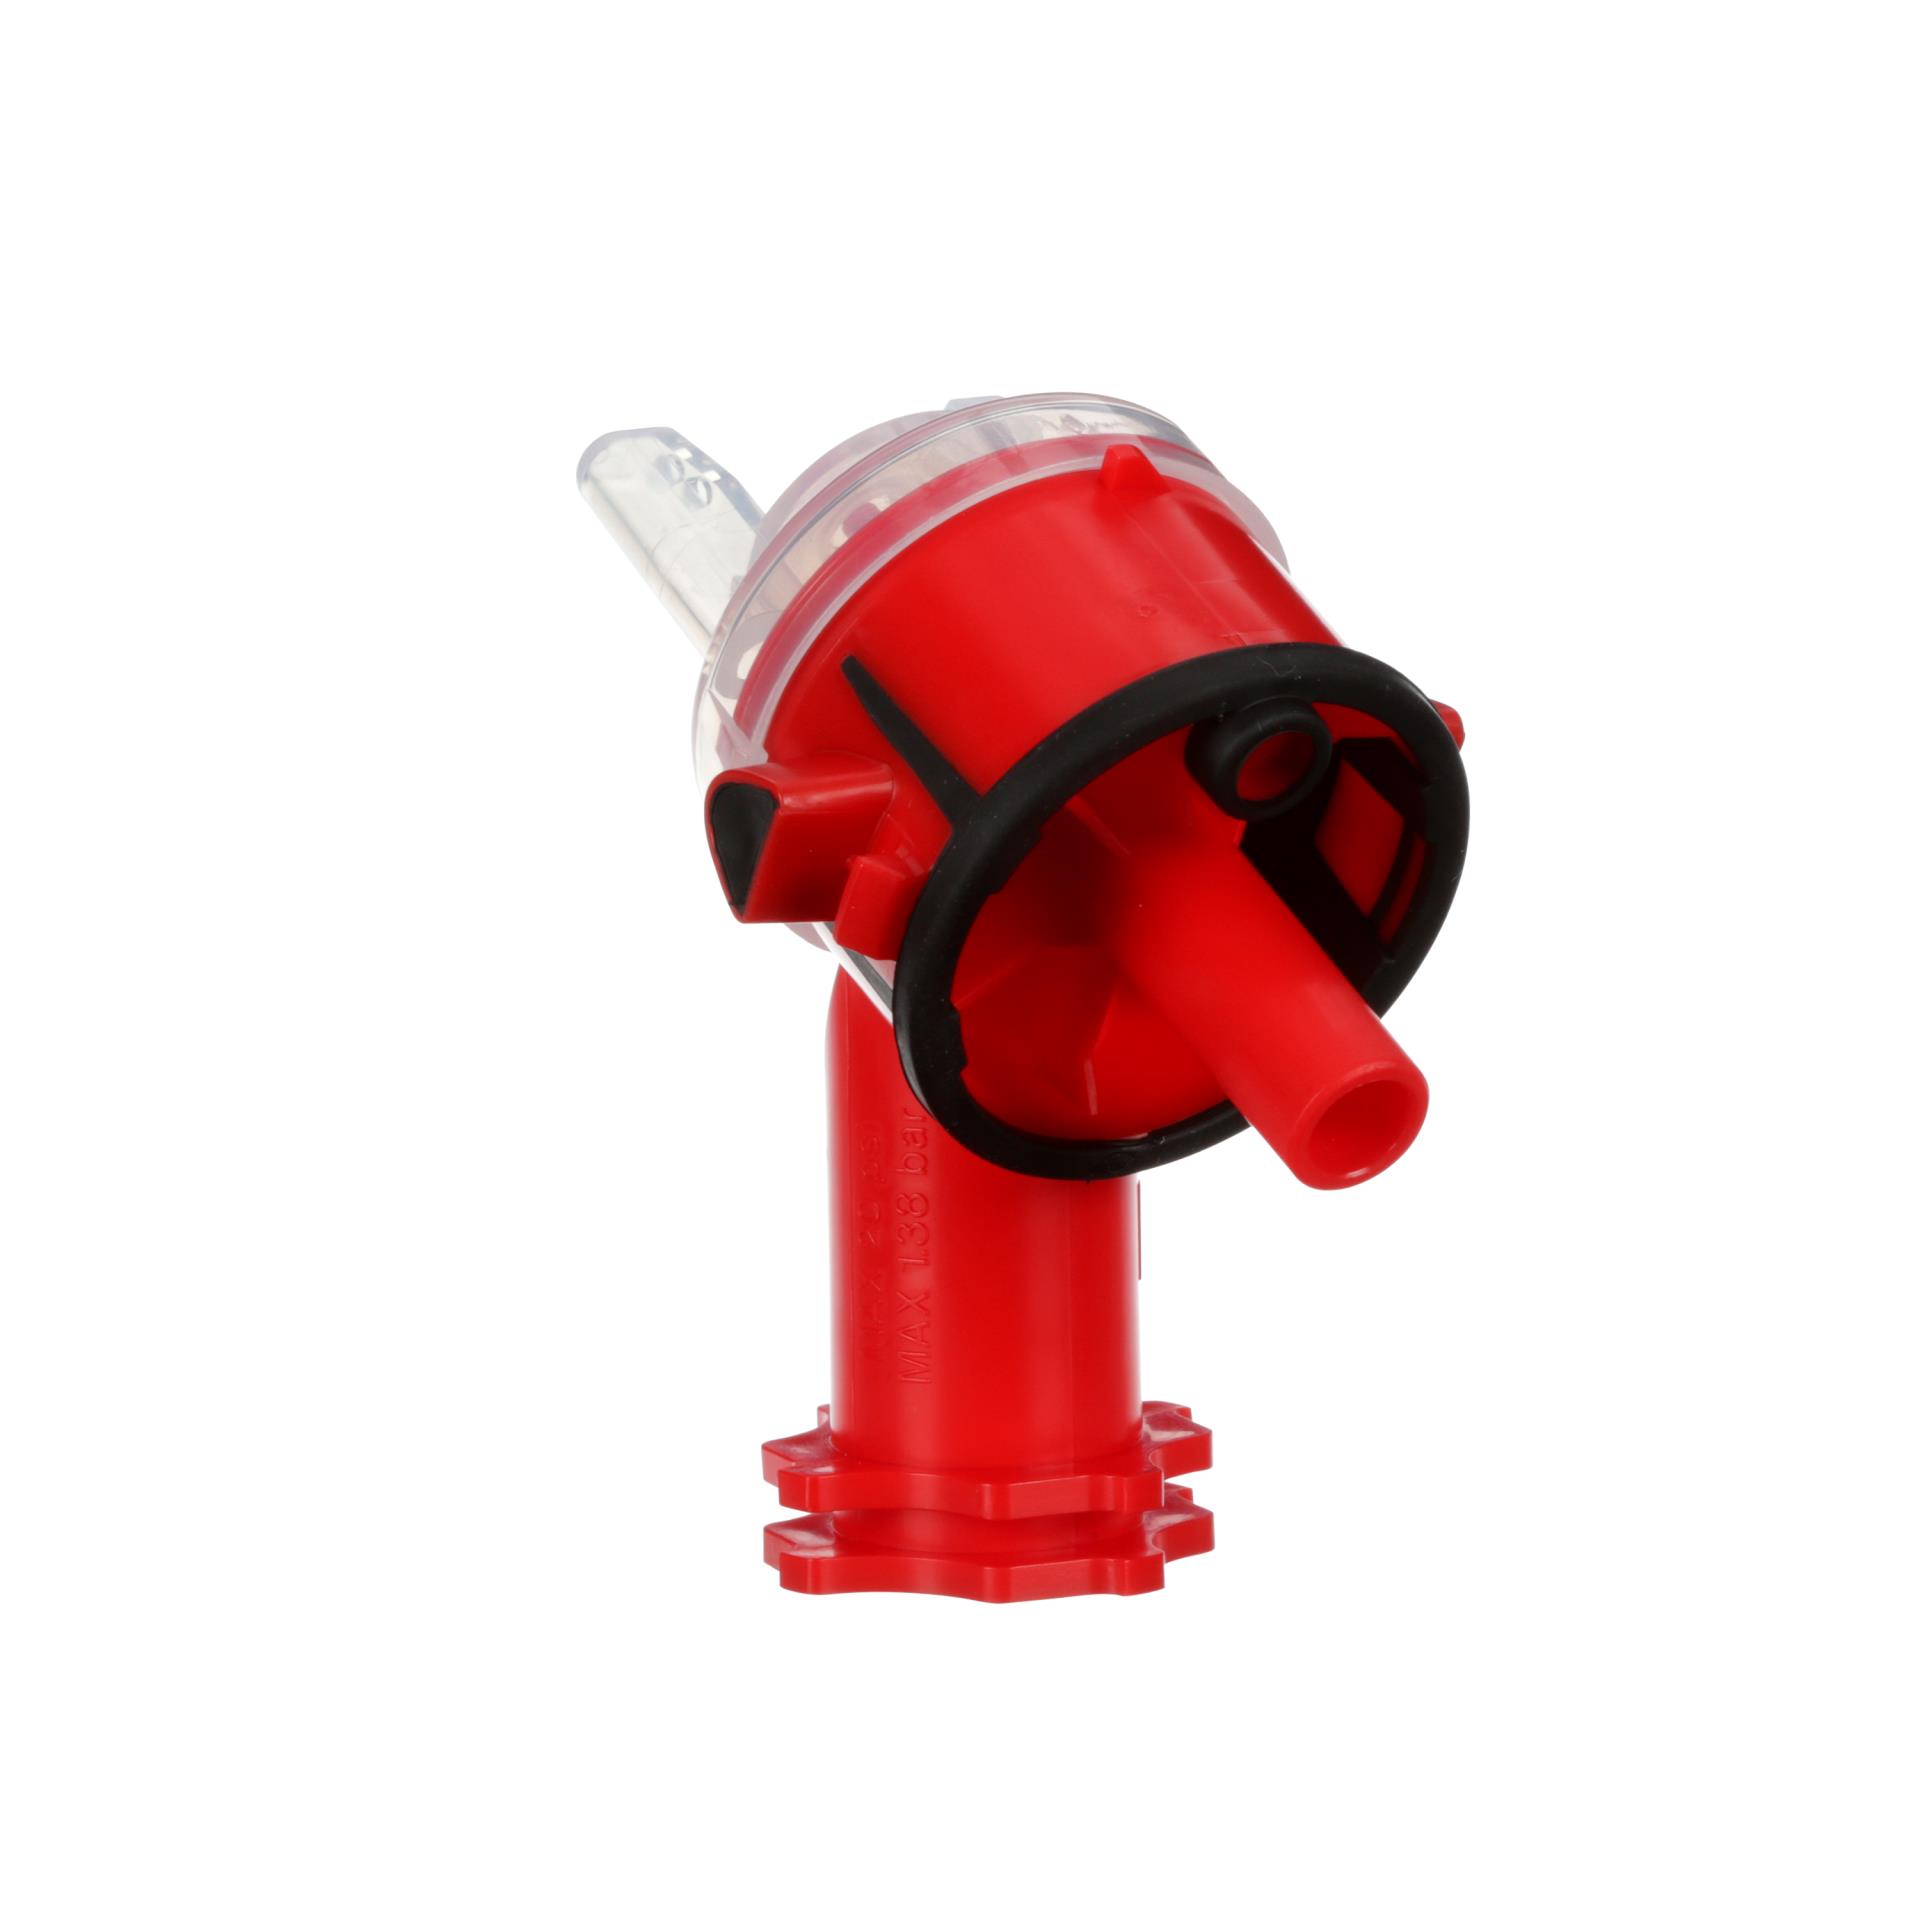 00051131166097 3M™ Accuspray™ Atomizing Head, 16609, Red, 2.0 mm, per  kit, kits per case Aircraft products tapes 6328156